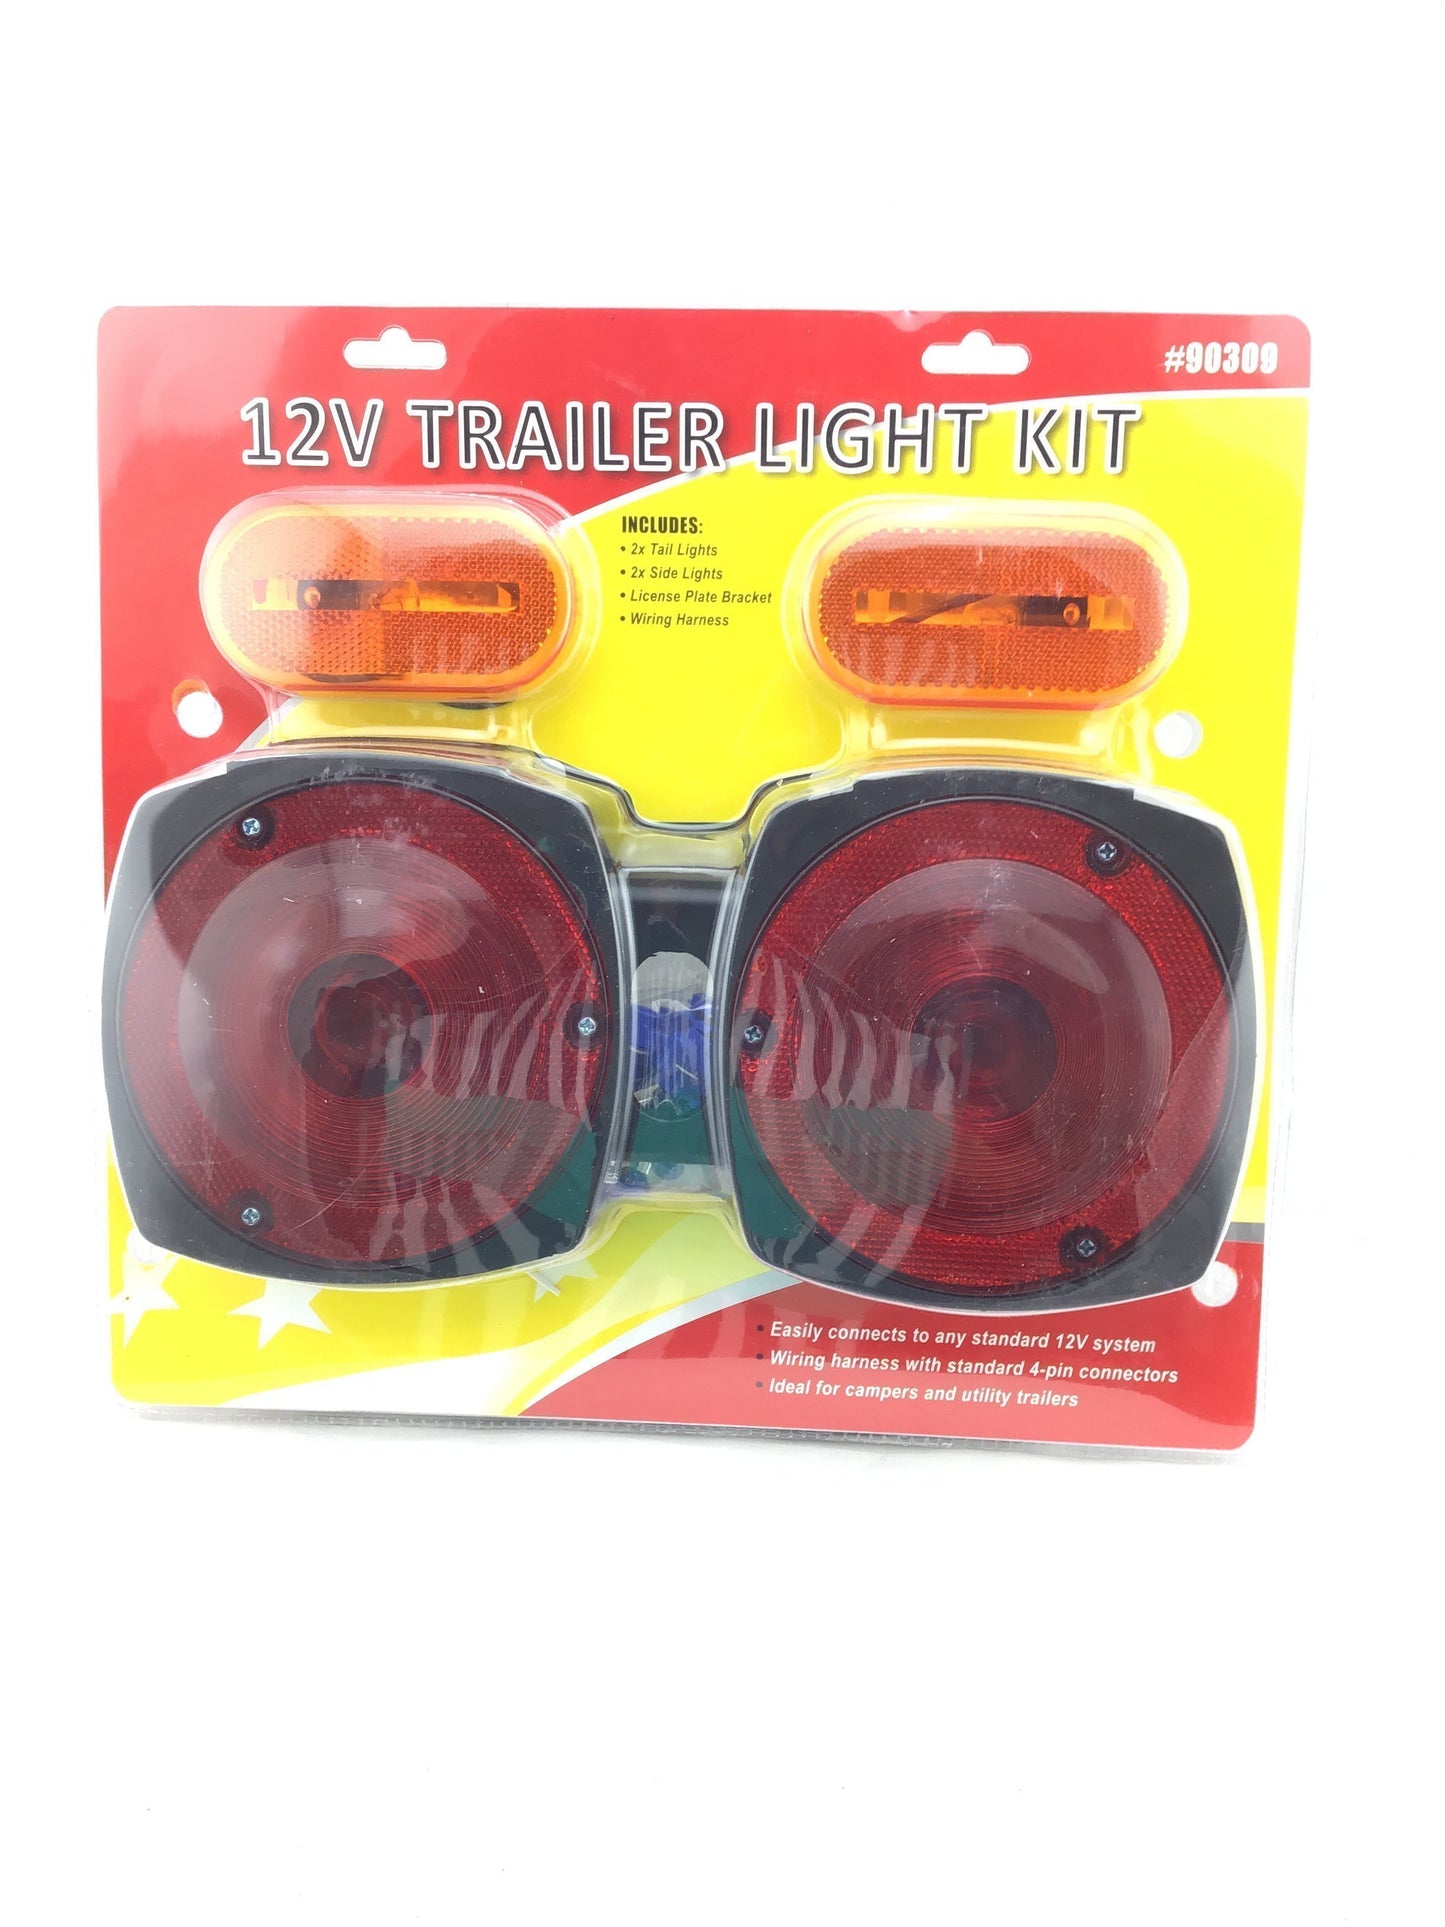 12V Trailer Light Kit out of stock 6.19.19-OTHER ITEMS-Tool Mart Inc.